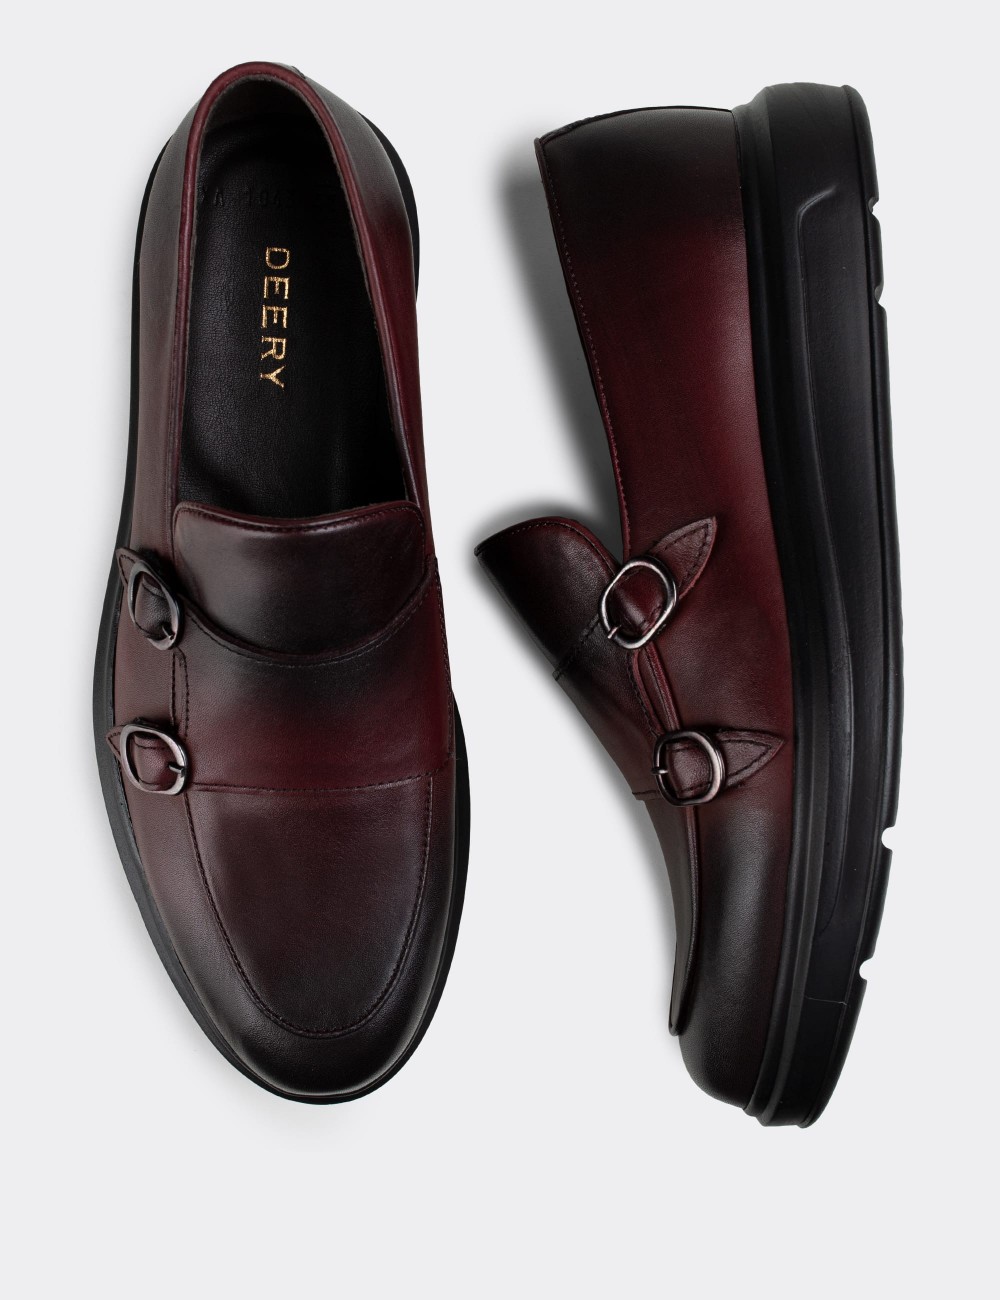 Burgundy  Leather Double Monk-Strap Loafers - 01843MBRDP01